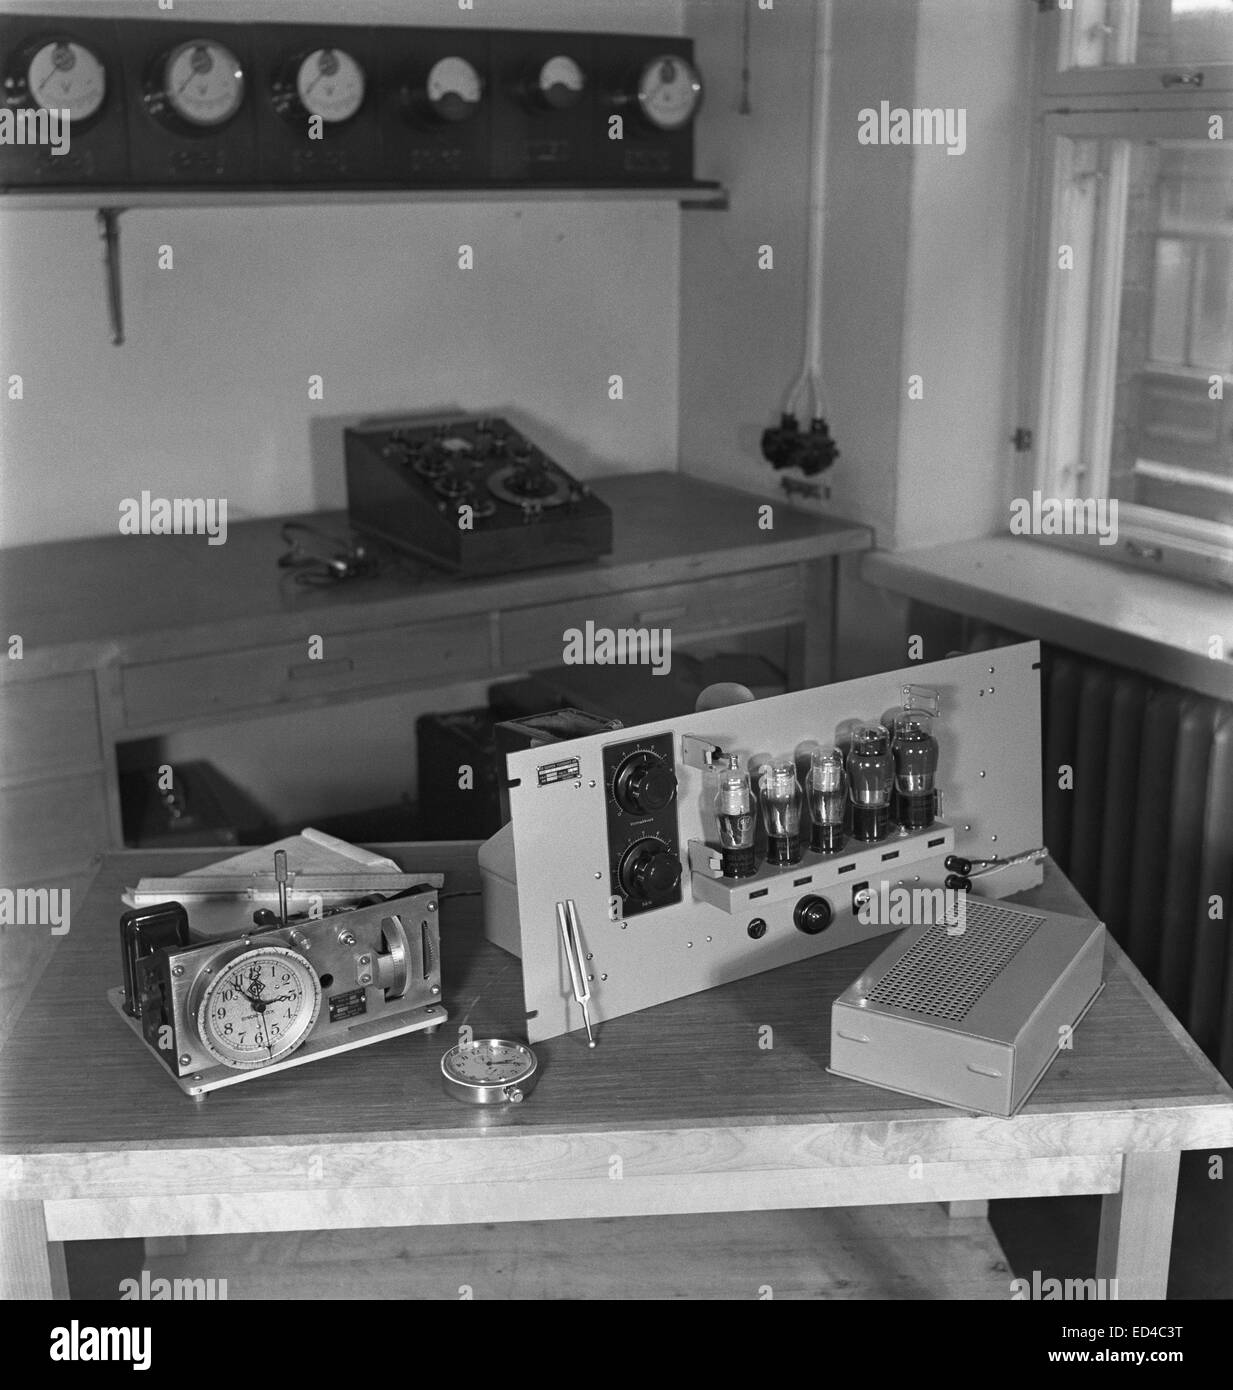 The Syncro-Clock time keeper,  Yleisradio's driving clock  and a kind of radio that received the time signal from the German hydrological institute's chronometer. A radio set which controlled  several time keepers in Yle's radio house, ca. 1945. Stock Photo